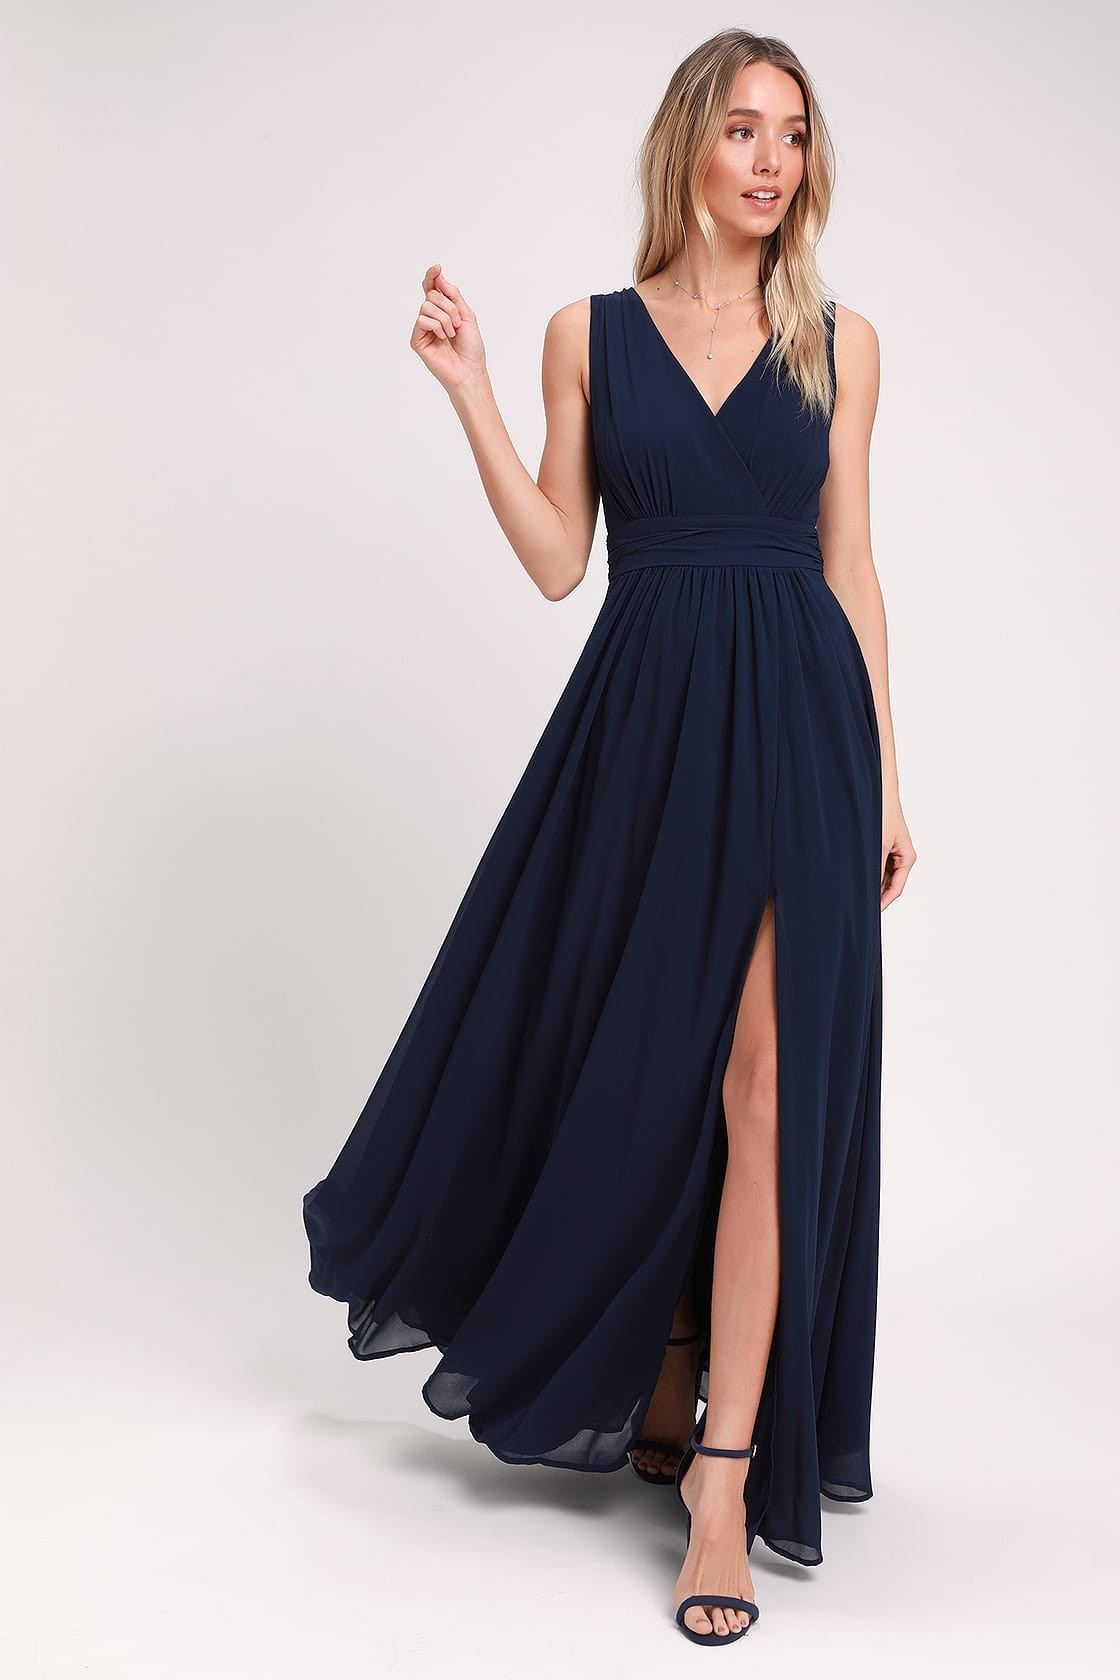 navy blue wedding guest outfit